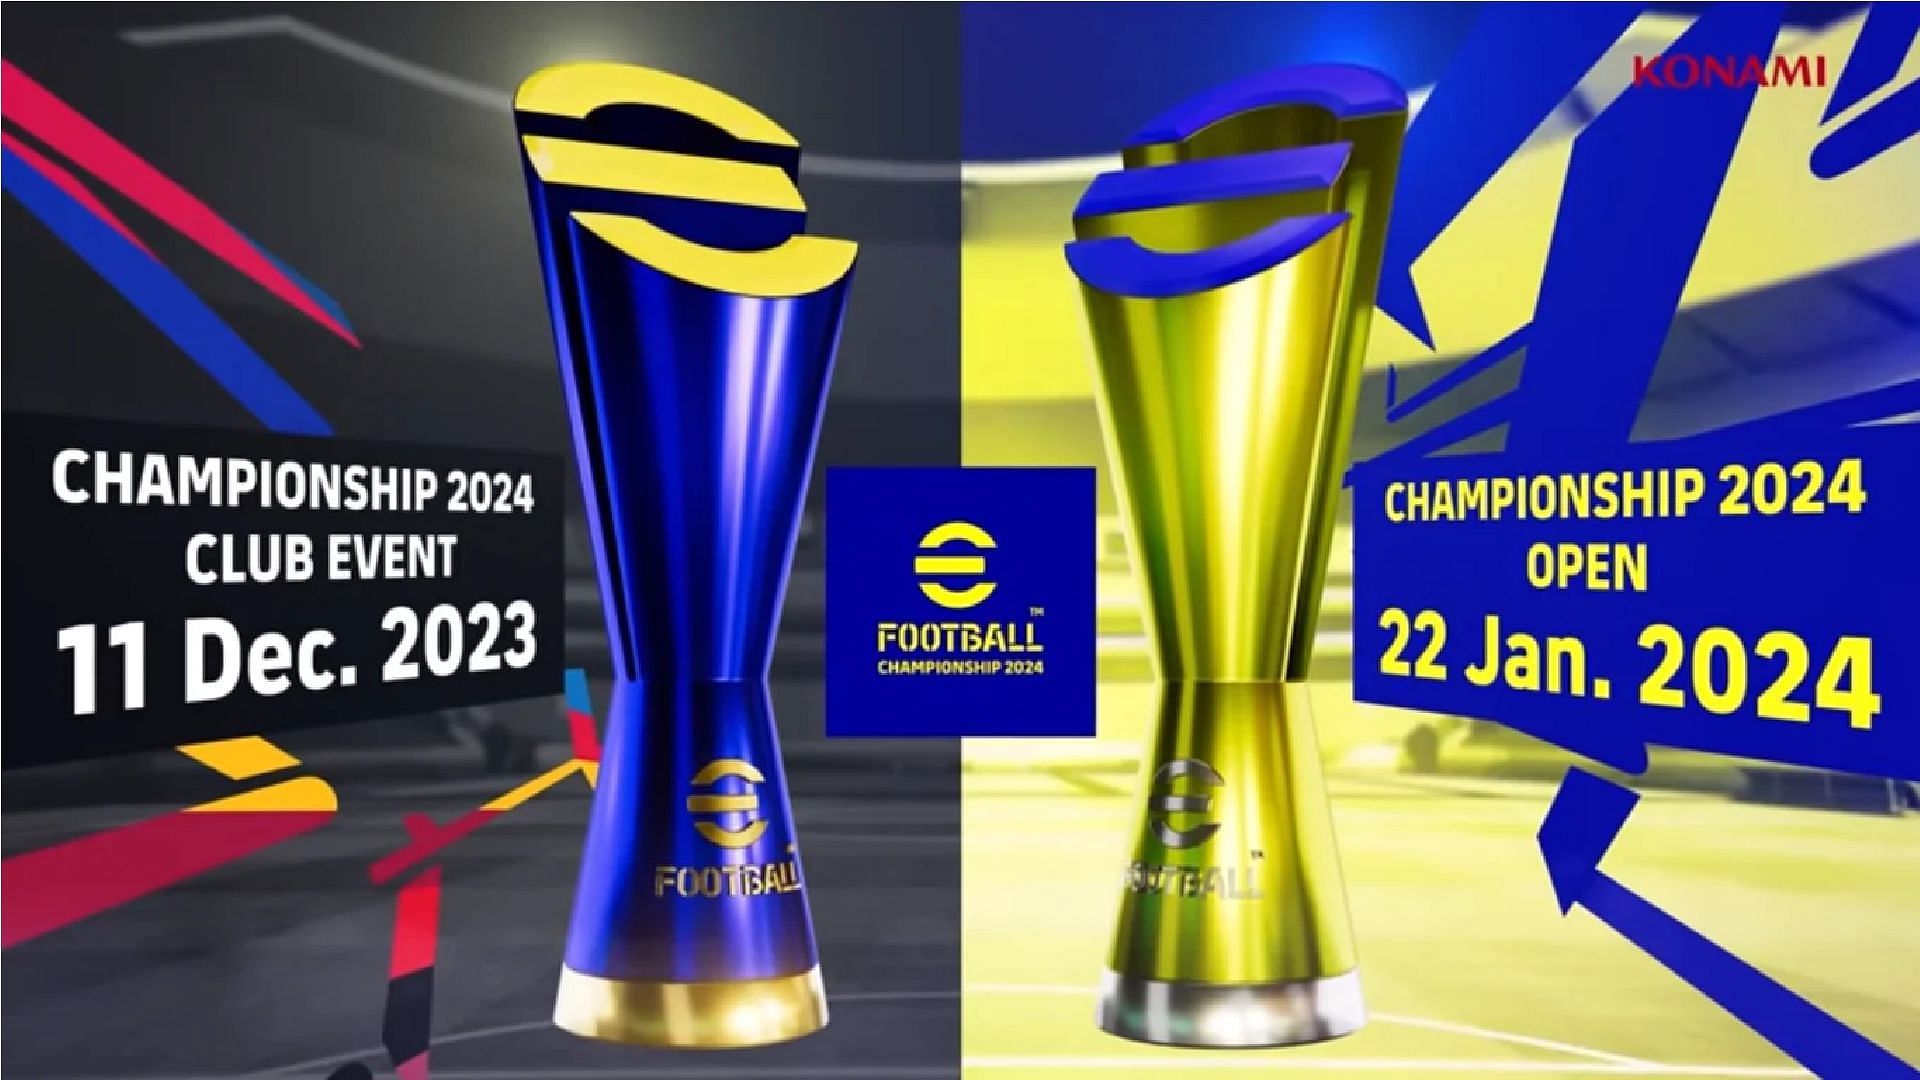 The winner of eFootball Championship 2024 Club Event will Clash against the eFootball Championship 2024 Open in the summer of 2024 for the ultimate crown (Image via Konami)